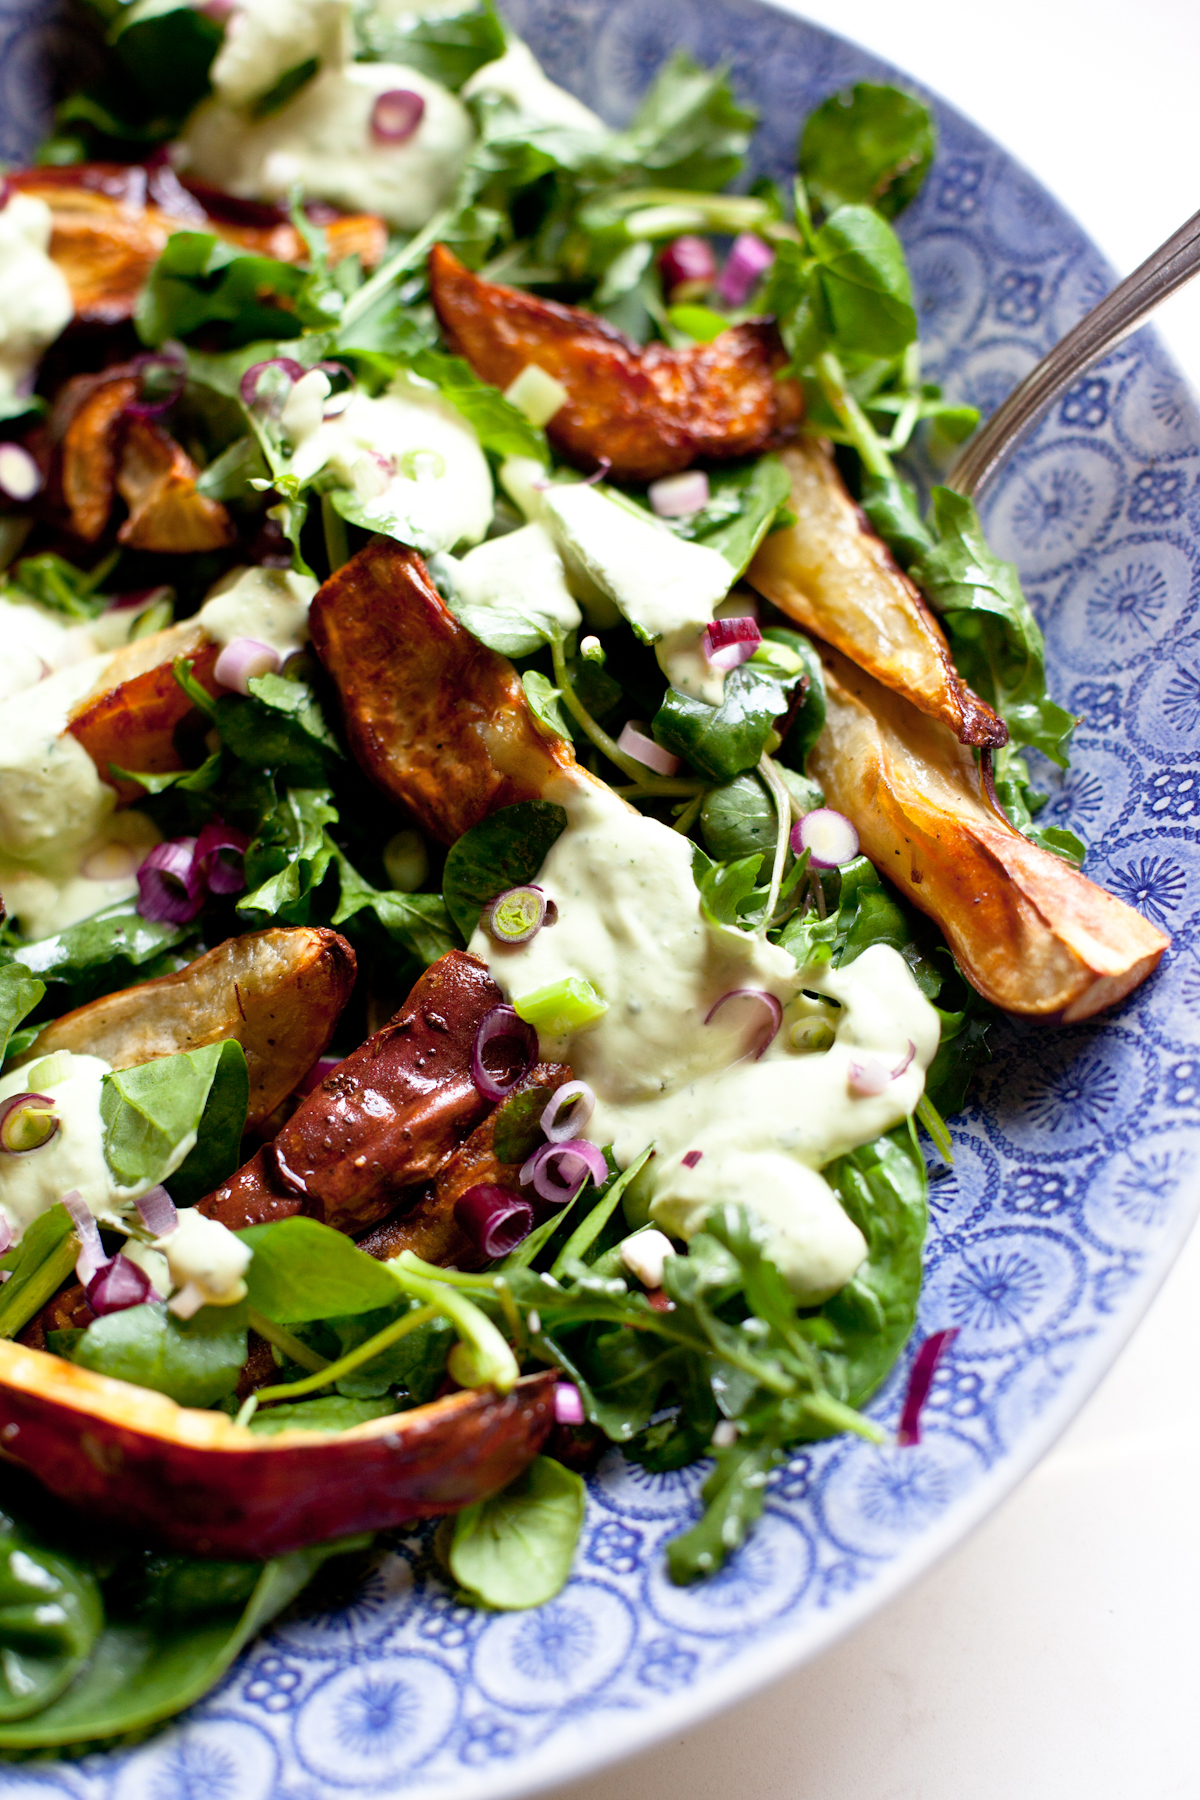 Sweet Potato Salad with Sour Cream and Coriander Dressing